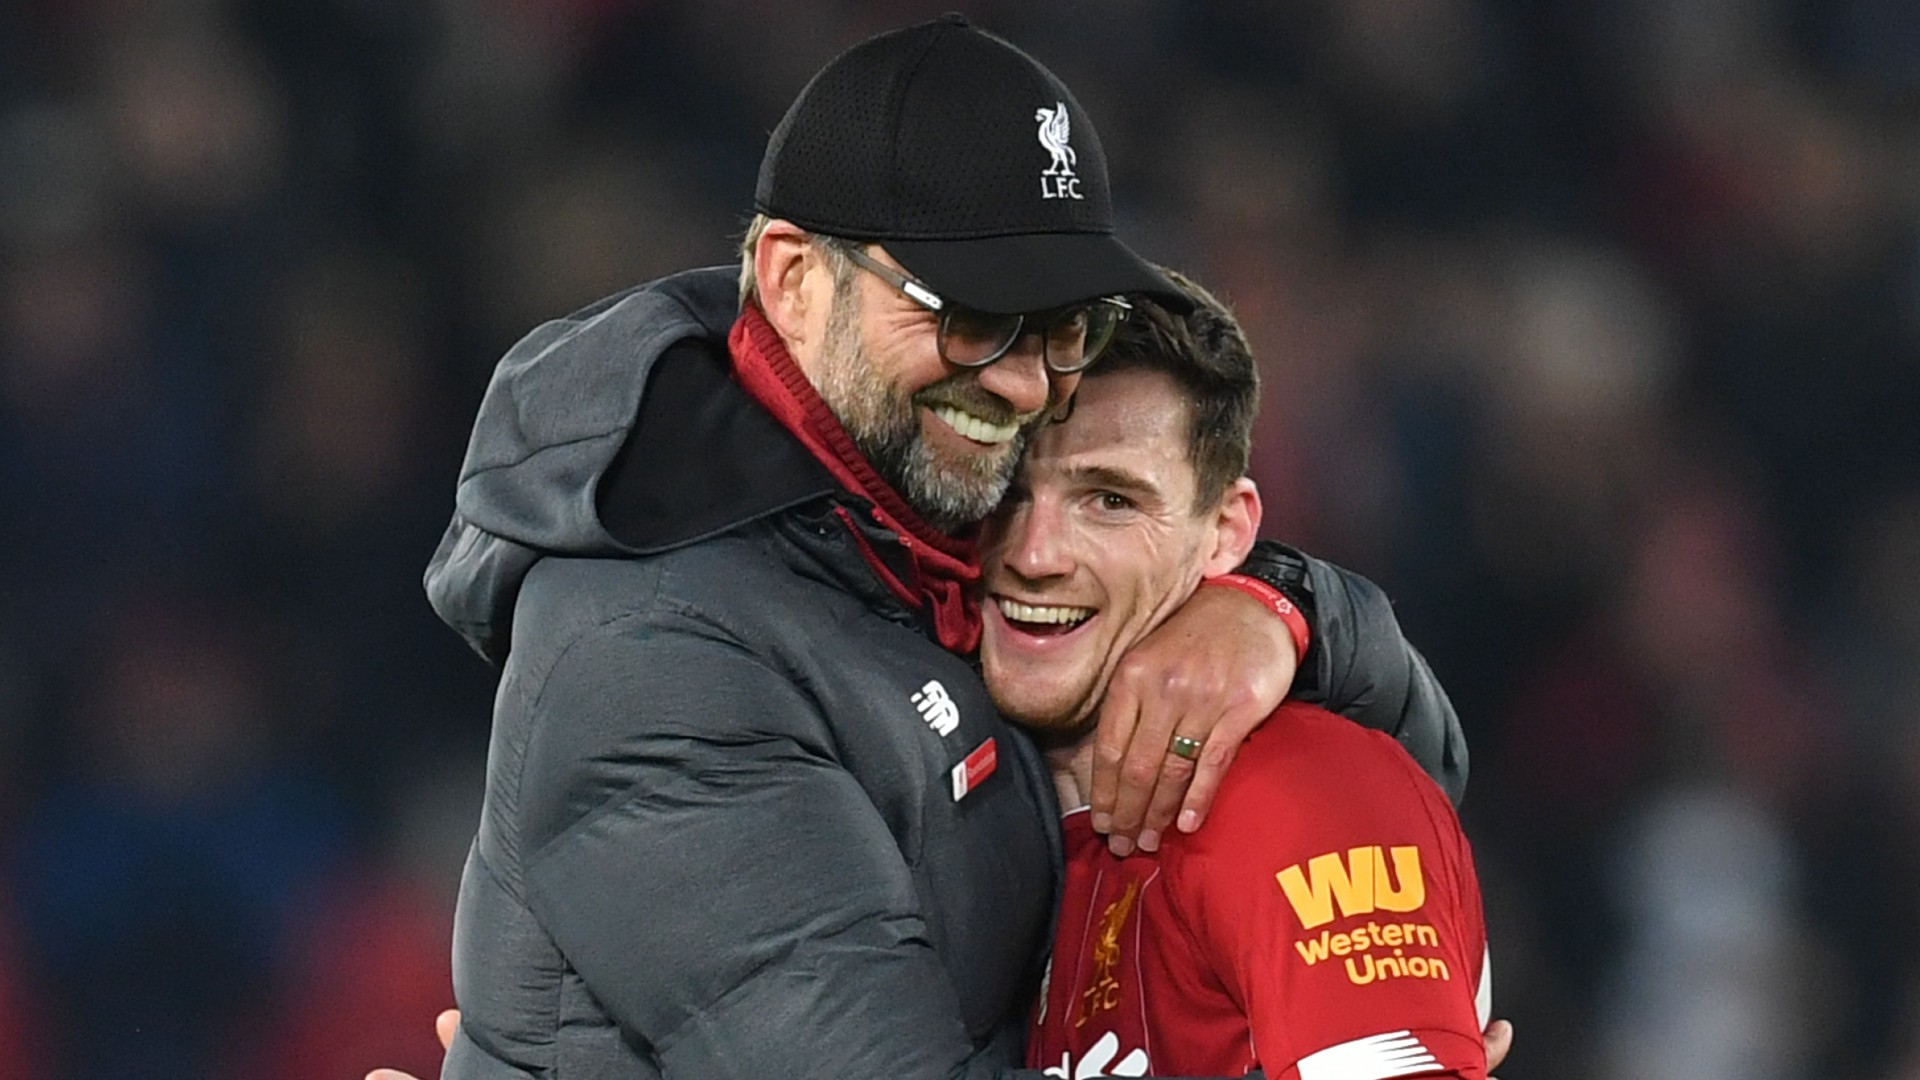 I like my players more than they like me, there are so many â€˜hard decisionsâ€™ at Liverpool, says Klopp